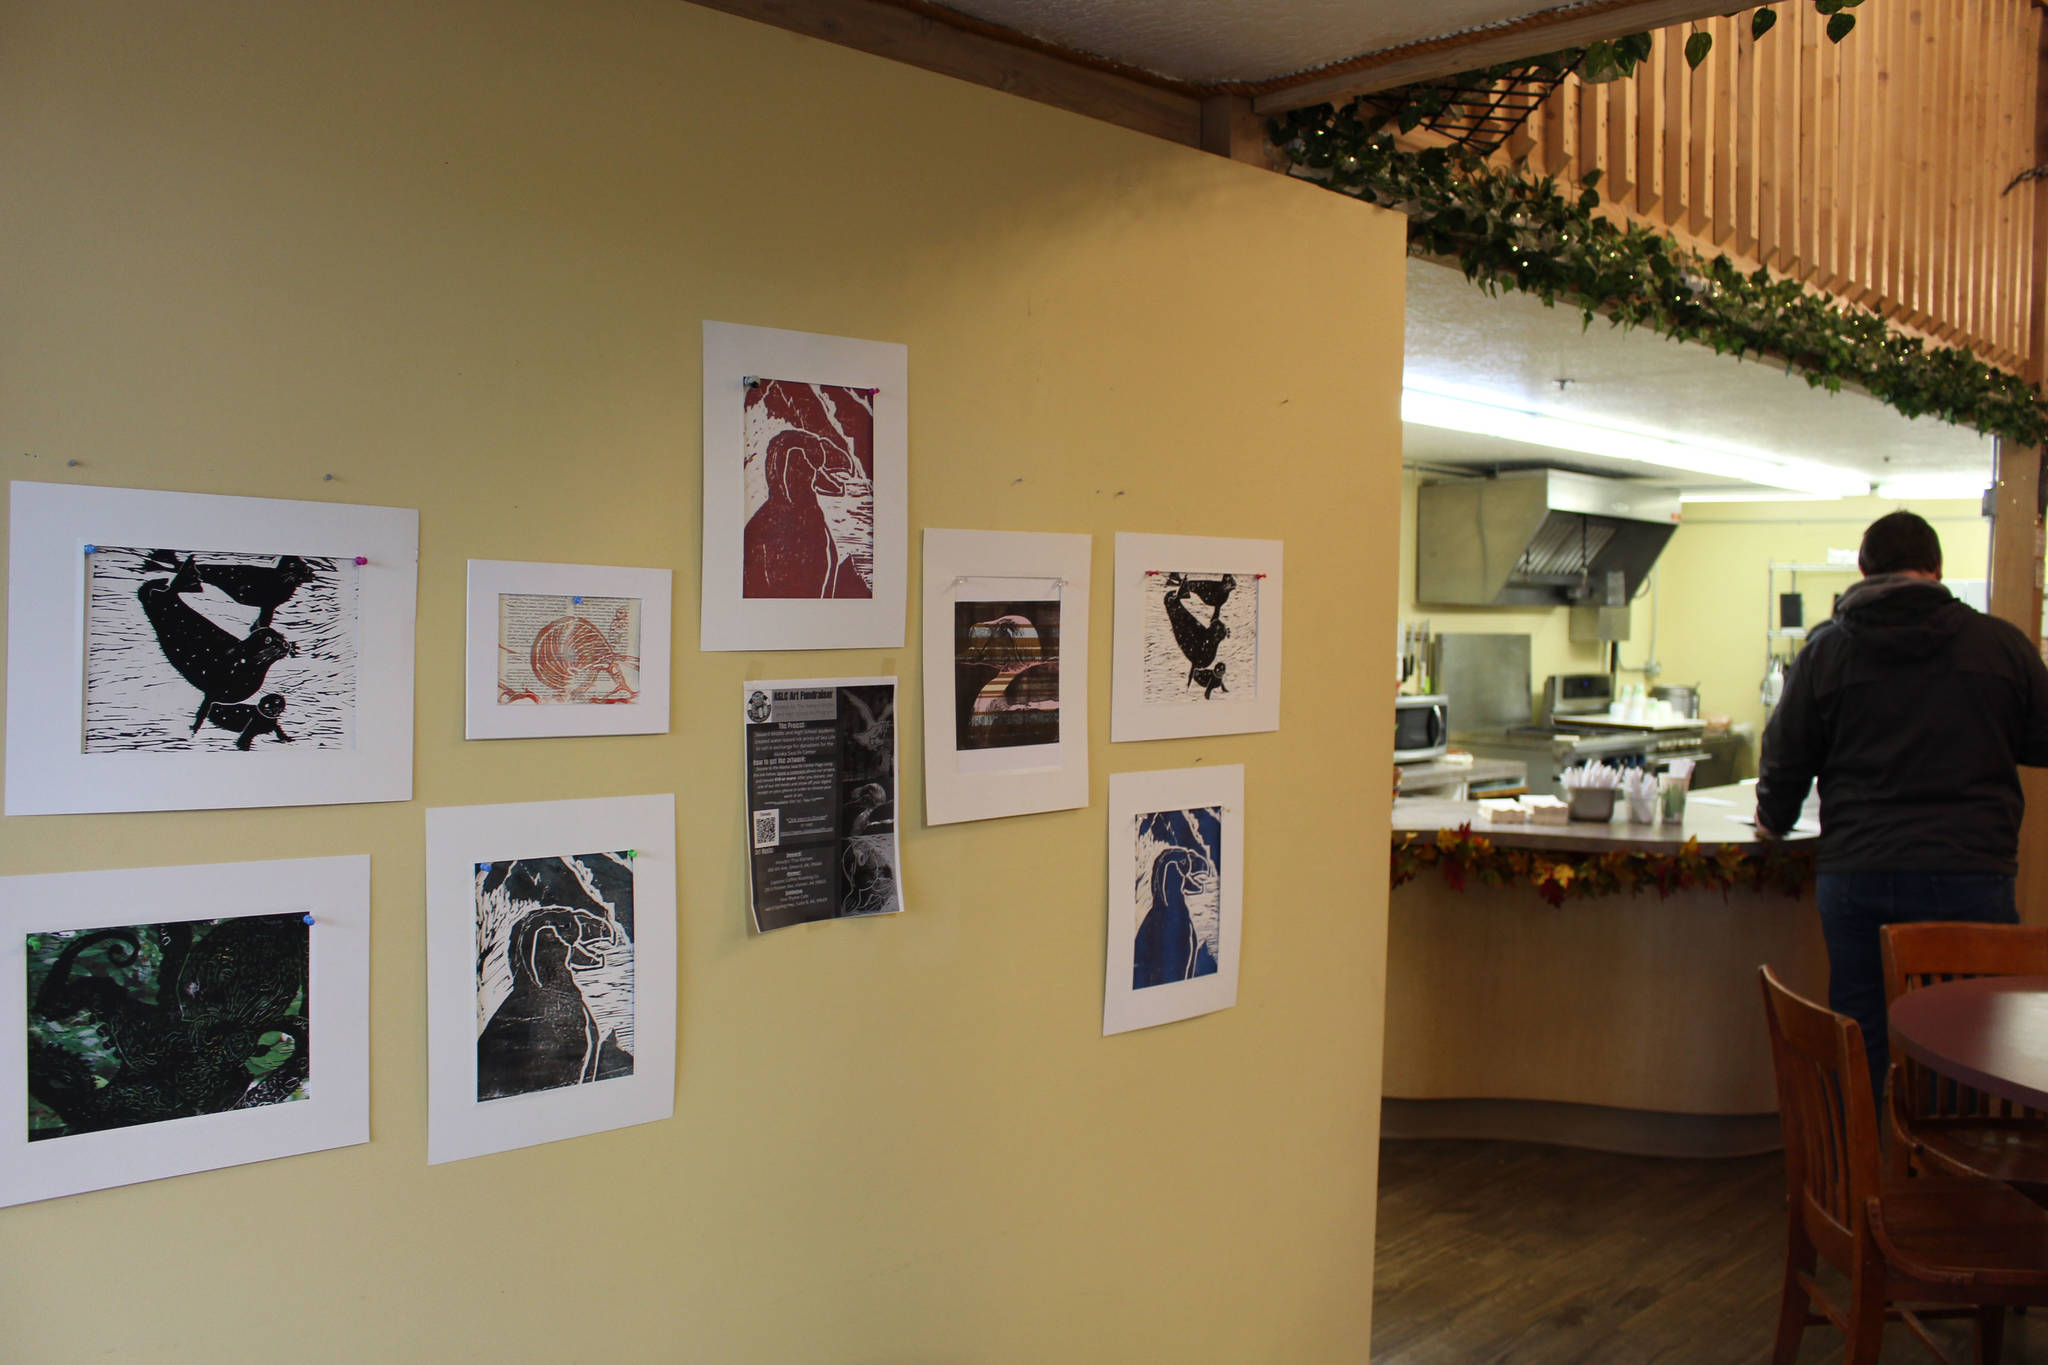 Linoleum prints made by Seward Middle and High School students are seen on display at Fine Thyme Cafe in Soldotna, Alaska on Oct. 23, 2020. Anyone who brings in a receipt showing they donated $10 or more to the Alaska SeaLife Center in Seward gets to take home a print of their choice. (Photo by Brian Mazurek/Peninsula Clarion)